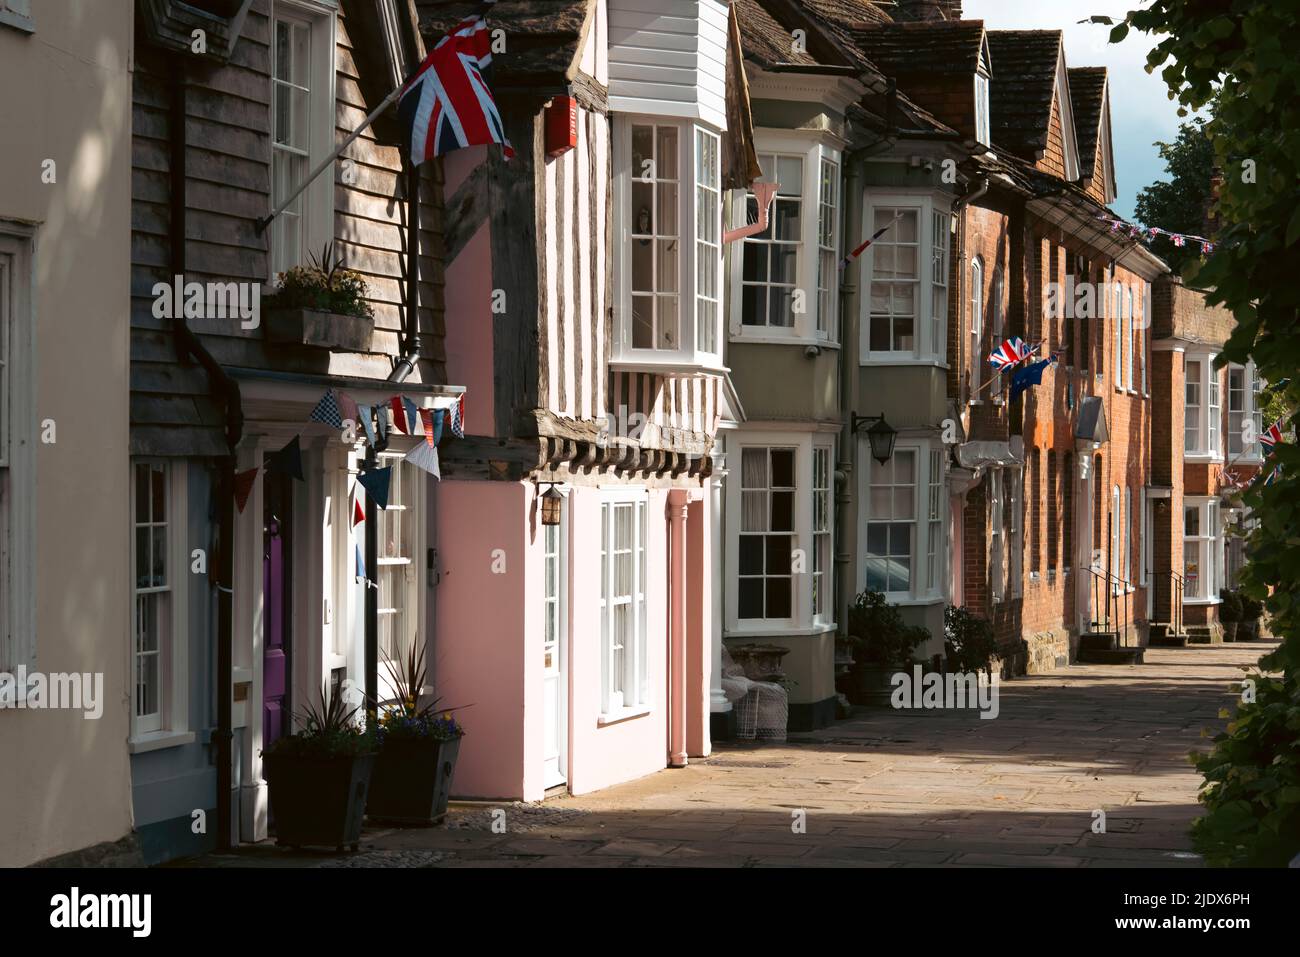 The historic Causeway with houses adorned with bunting and Union flags to celebrate the Queens Jubilee in June 2022, Horsham, West Sussx, UK Stock Photo